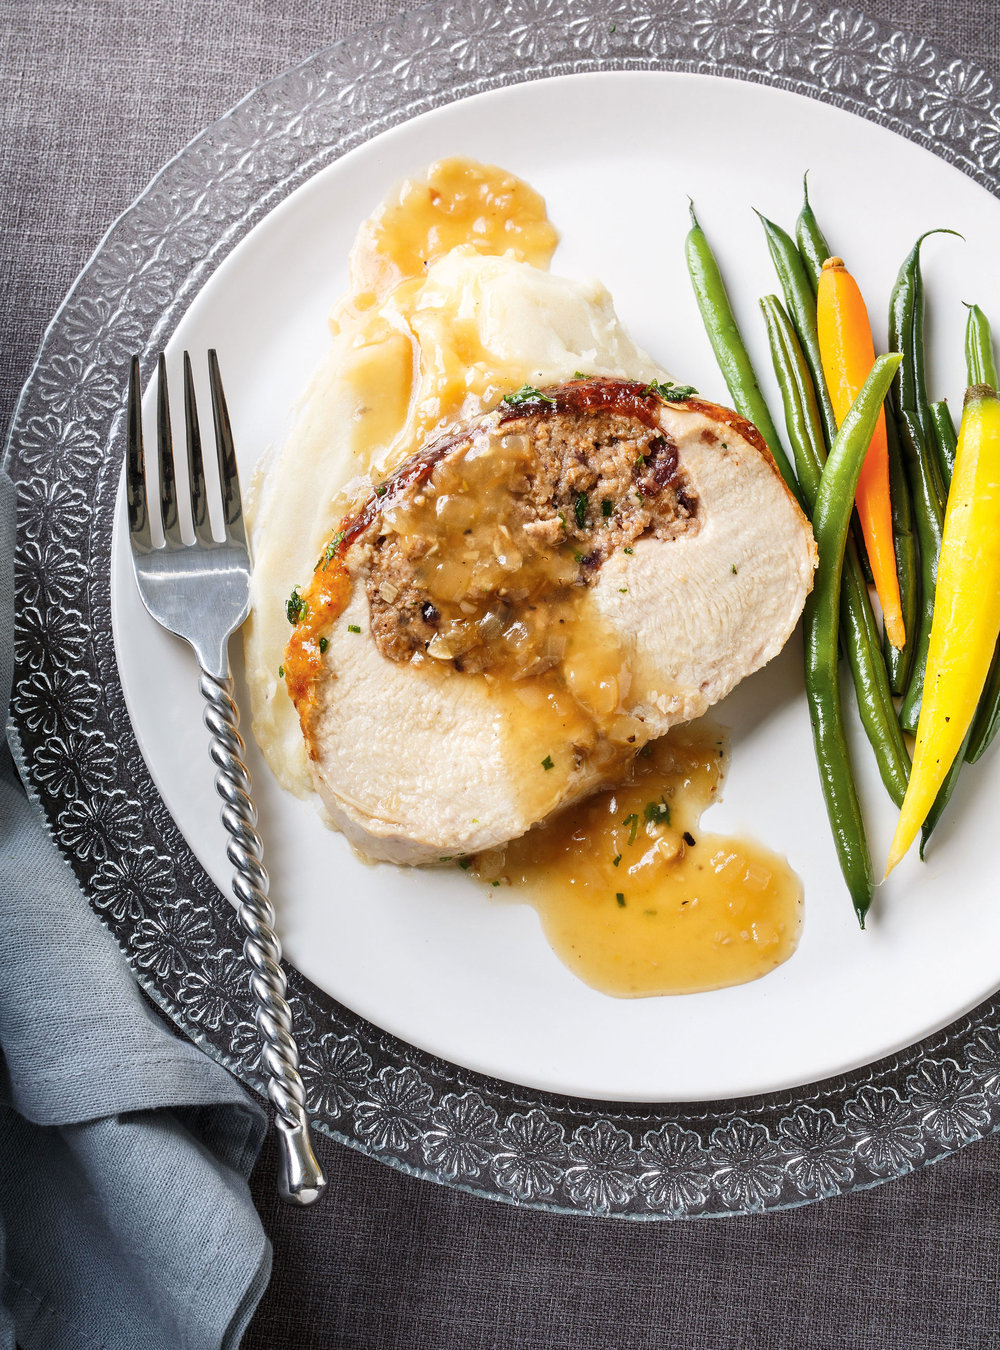 Gluten-Free, Dairy-Free  and Nut-Free Stuffed Turkey Roast  with Sausage and Cranberry